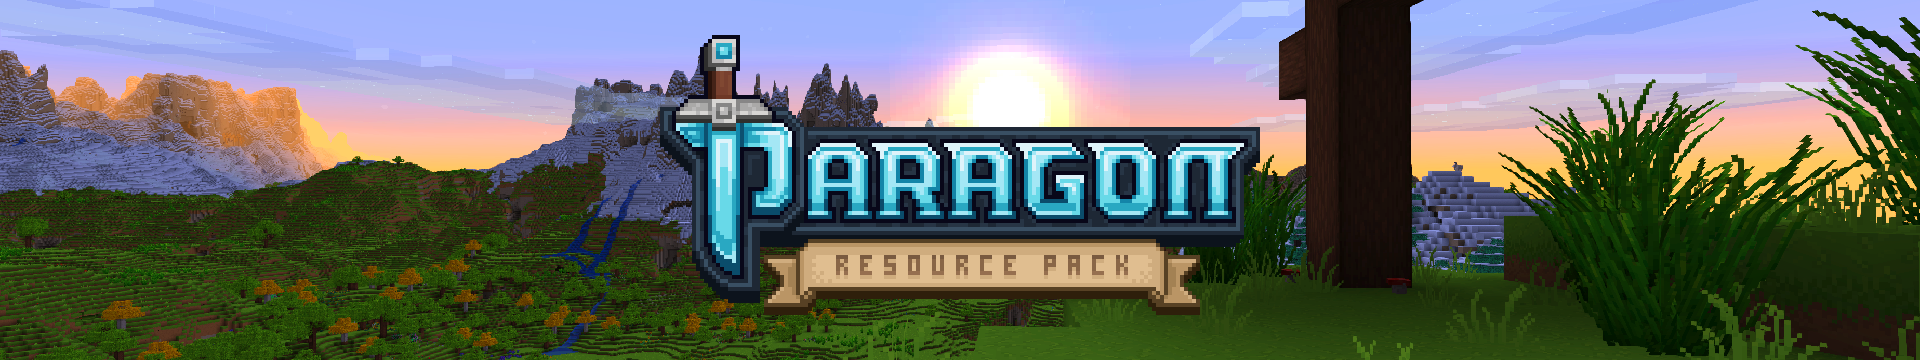 Paragon Resource Pack Minecraft Texture Pack